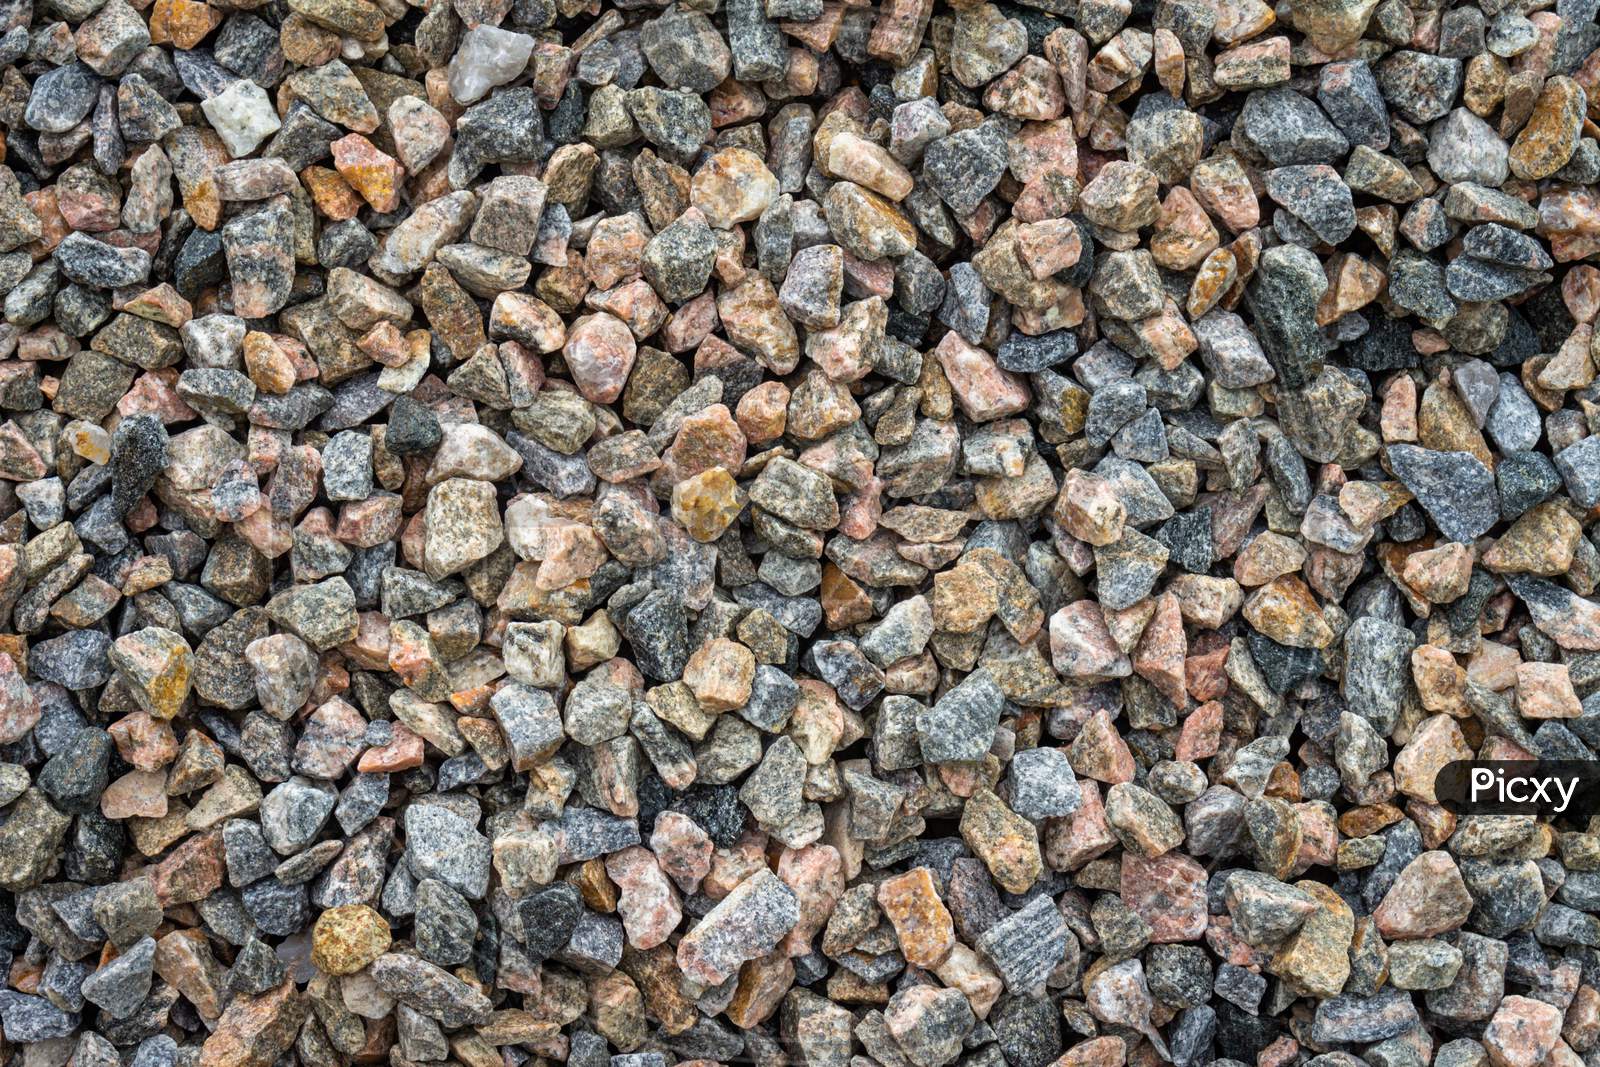 Small Broken Stones Used For Construction. Natural Material For Columns And Bases Of Buildings.